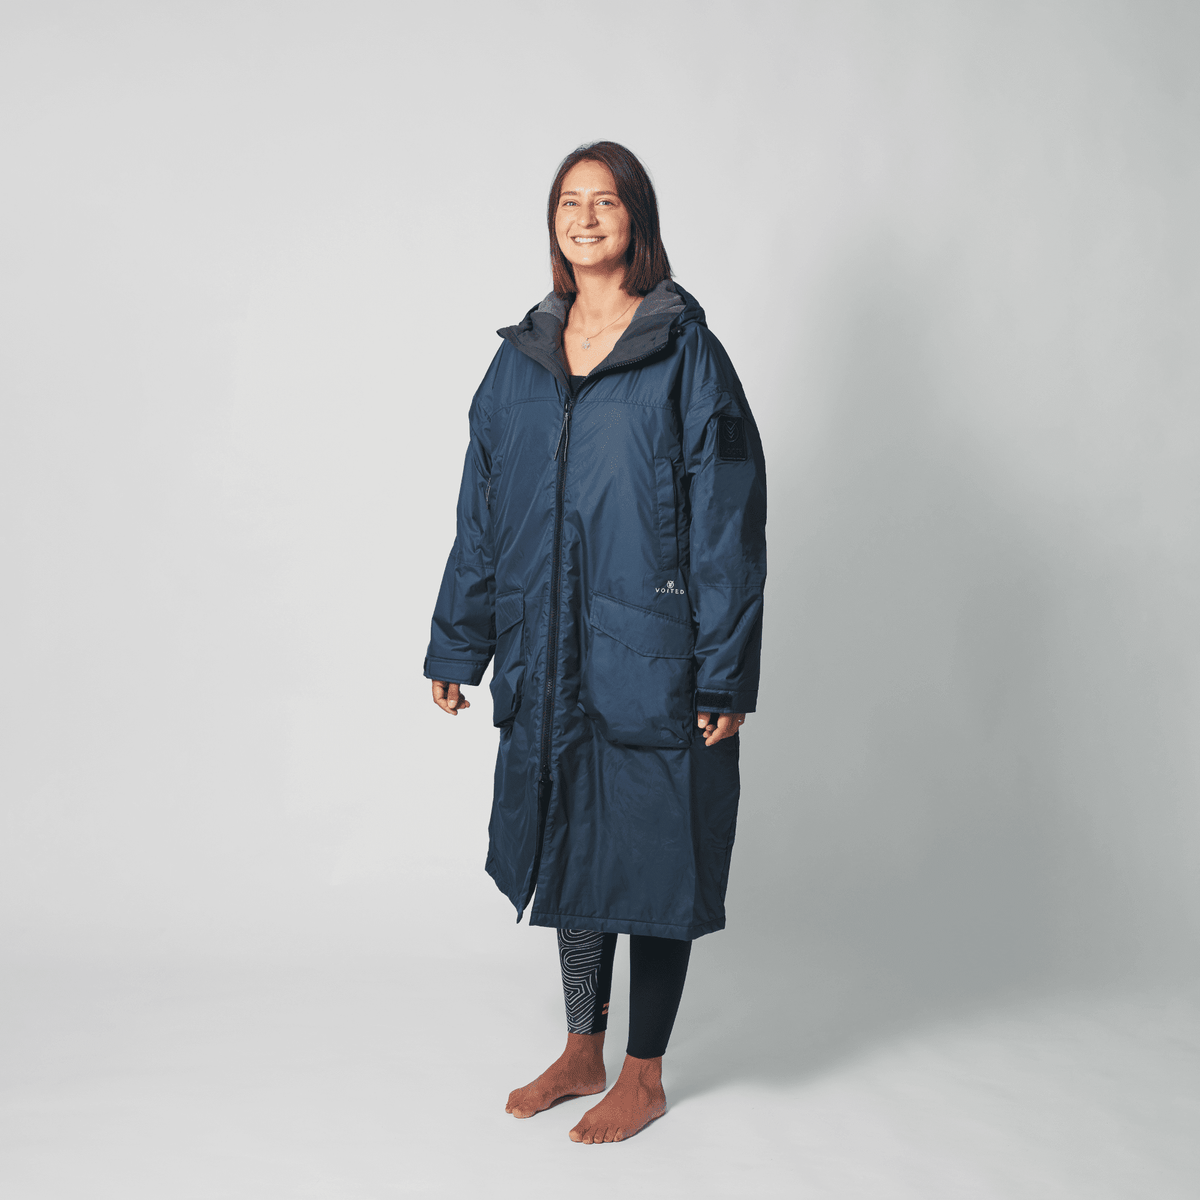 VOITED 2nd Edition Outdoor Change Robe & Drycoat for Surfing, Camping, Vanlife & Wild Swimming - Ocean Navy Changewear VOITED 